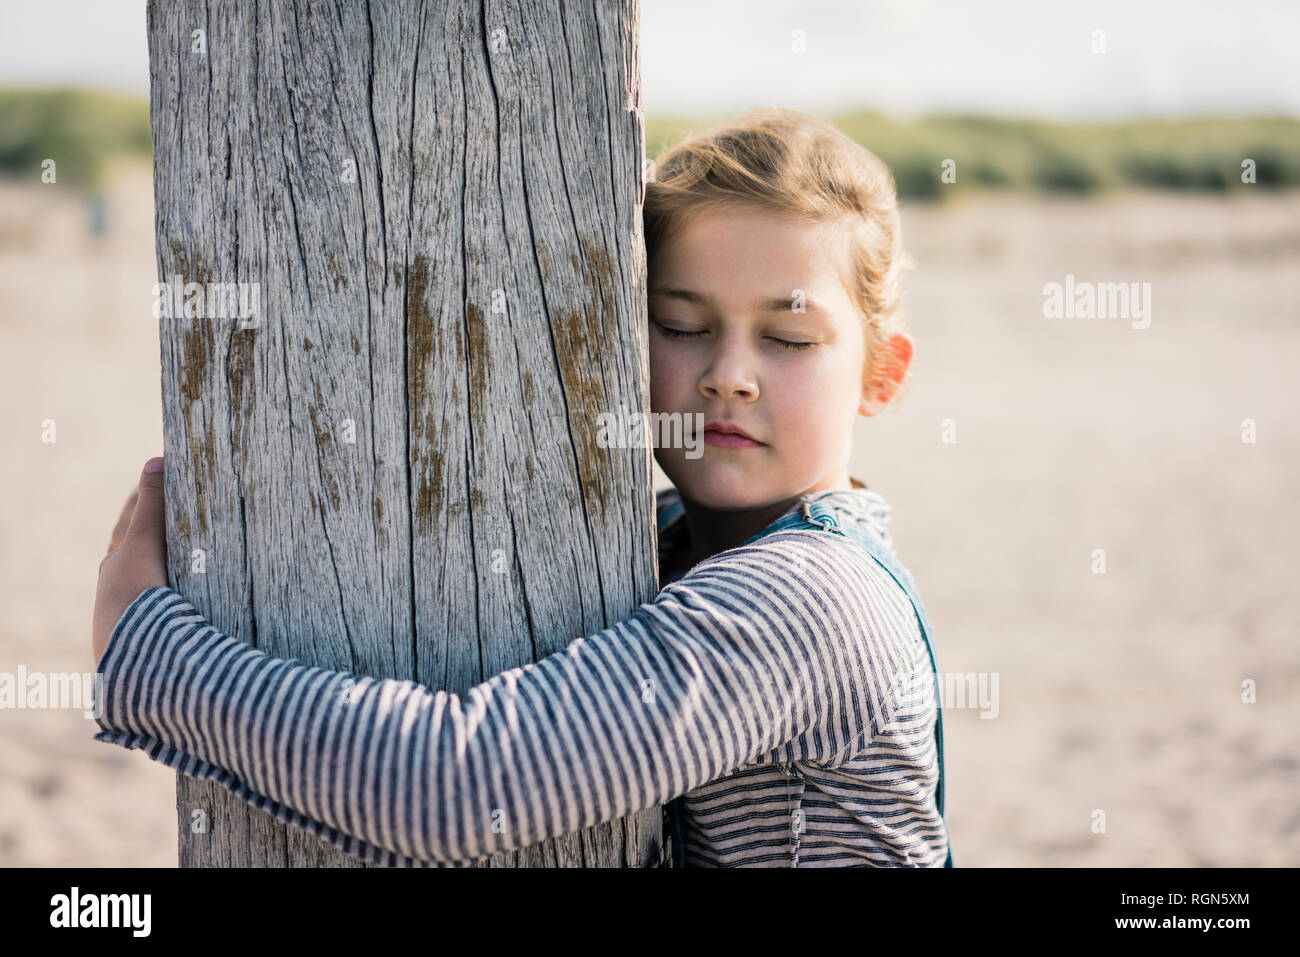 Little girl embracing wood pole with closed eyes Stock Photo